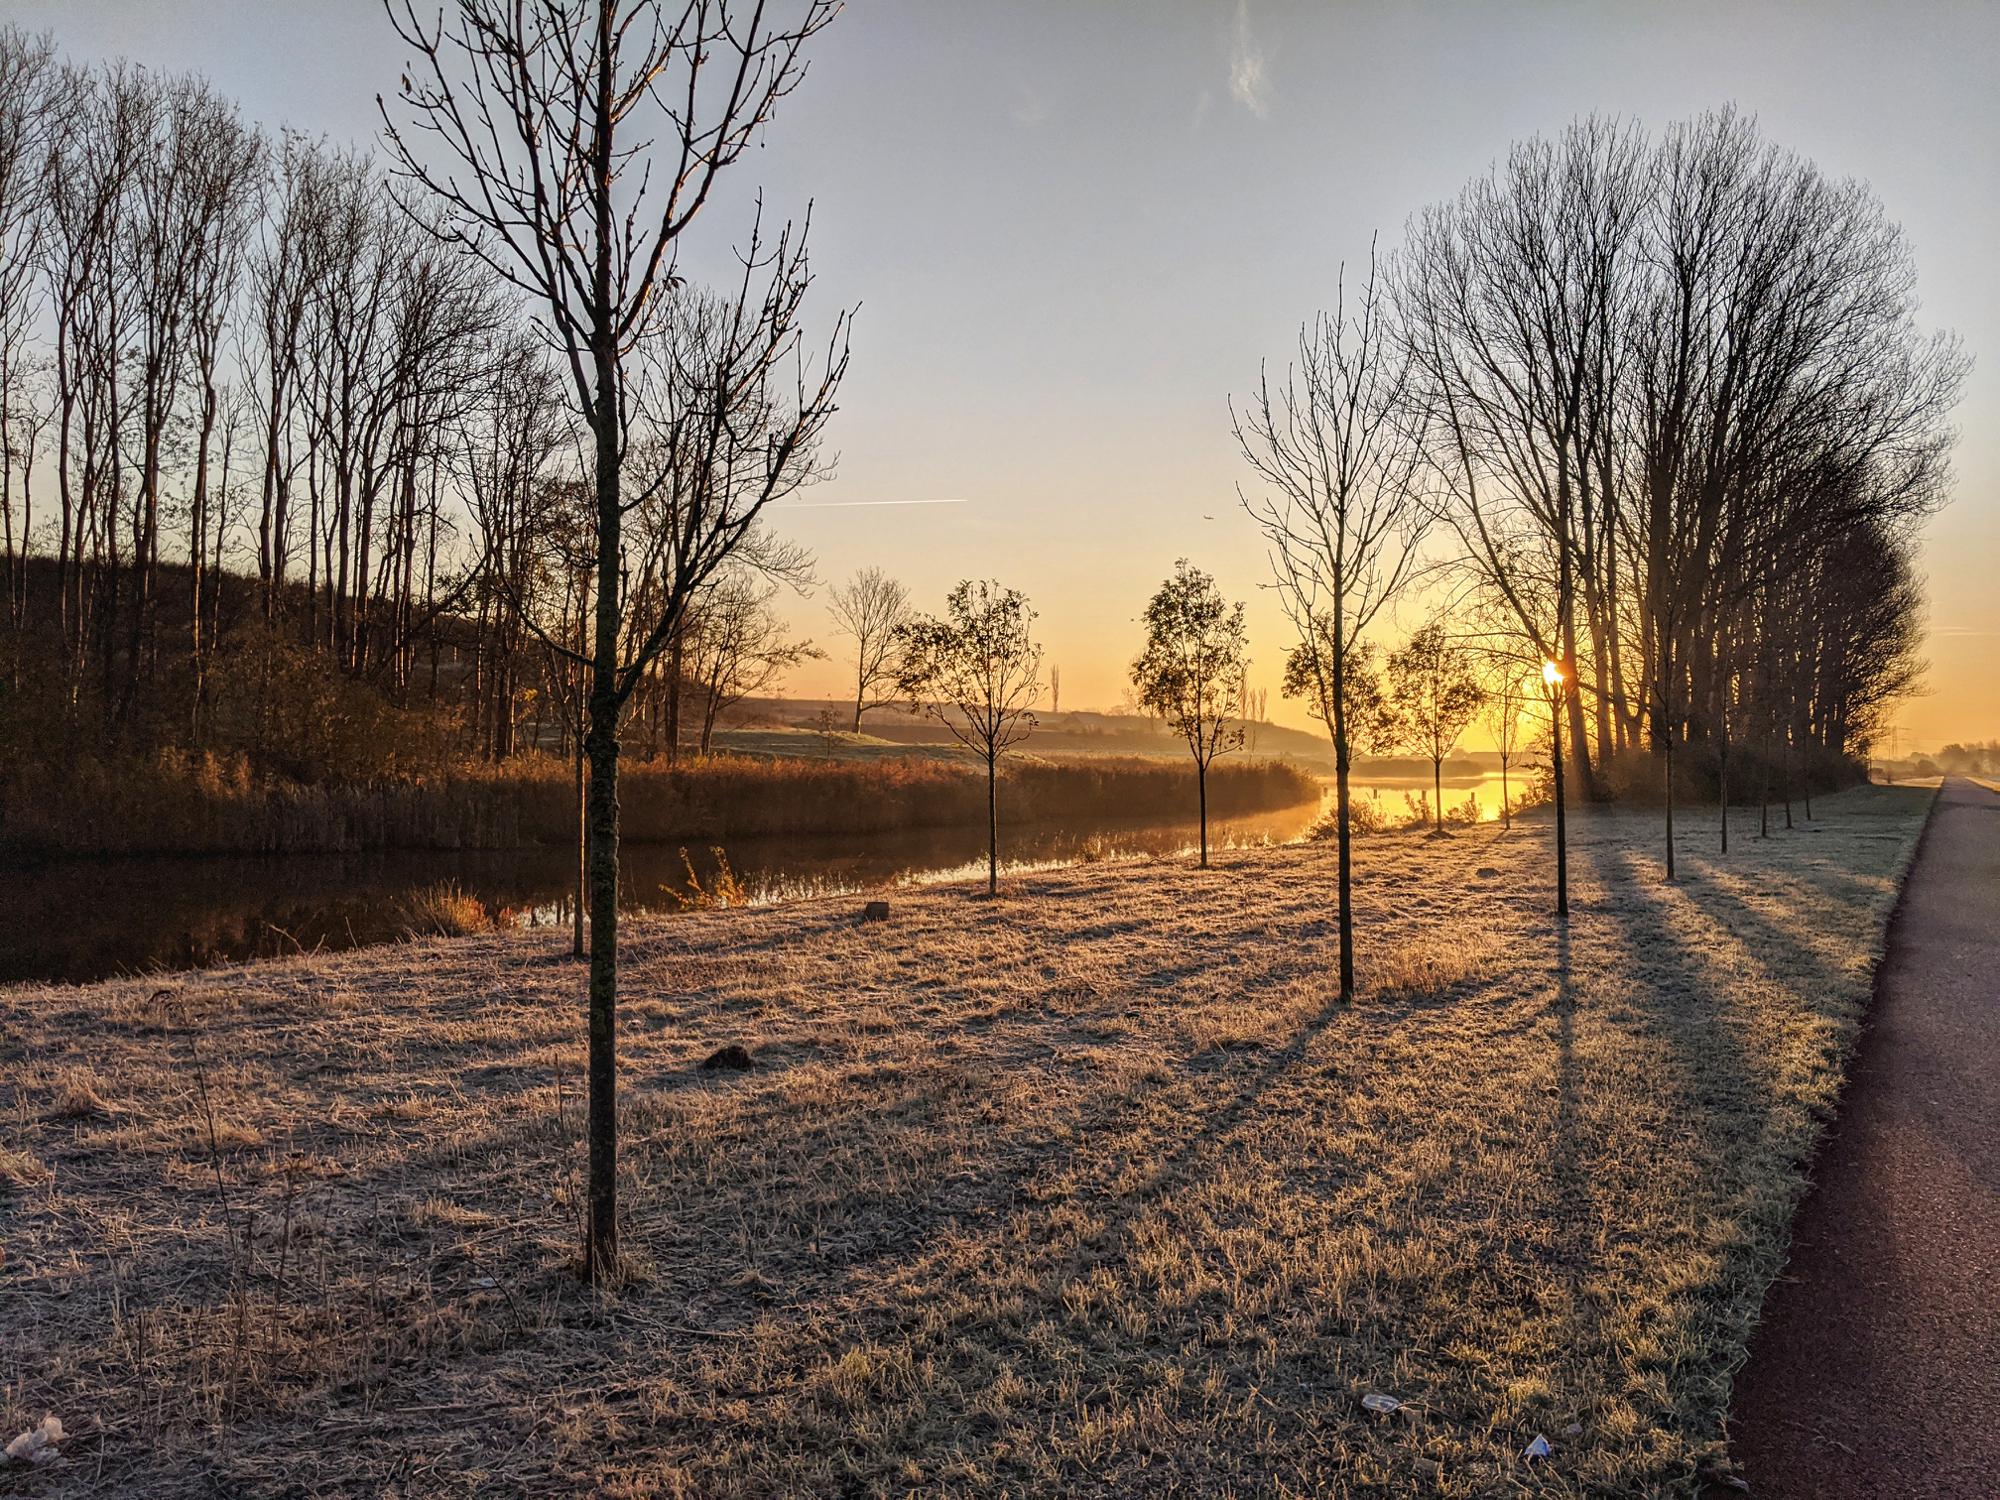 Dawn over a frozen field of grass, trees, and water next to a bicycle lane